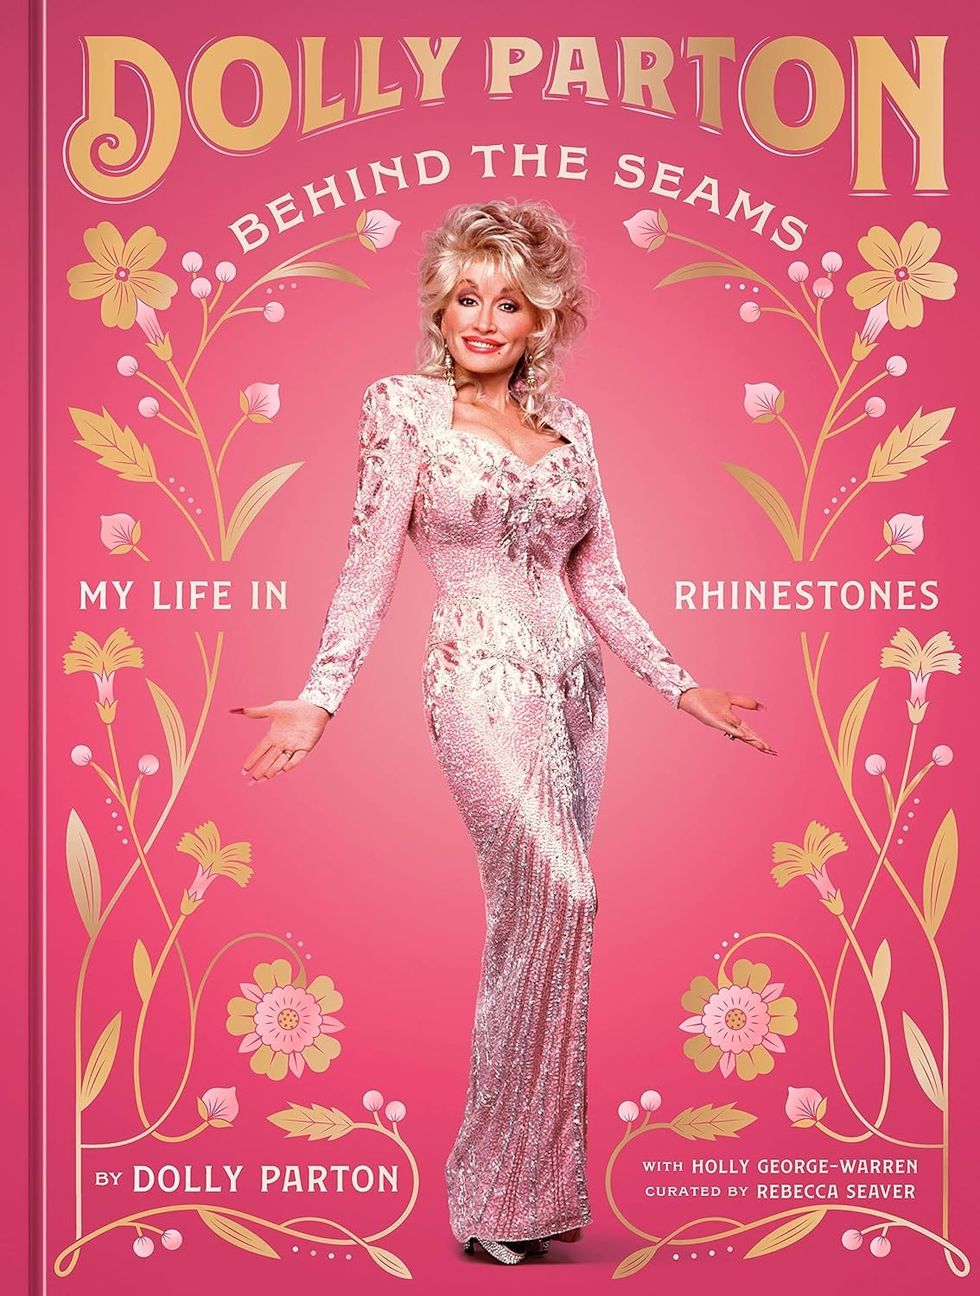 Behind the Seams: My Life in Rhinestones by Dolly Parton with Holly George-Warren and Rebecca Seaver